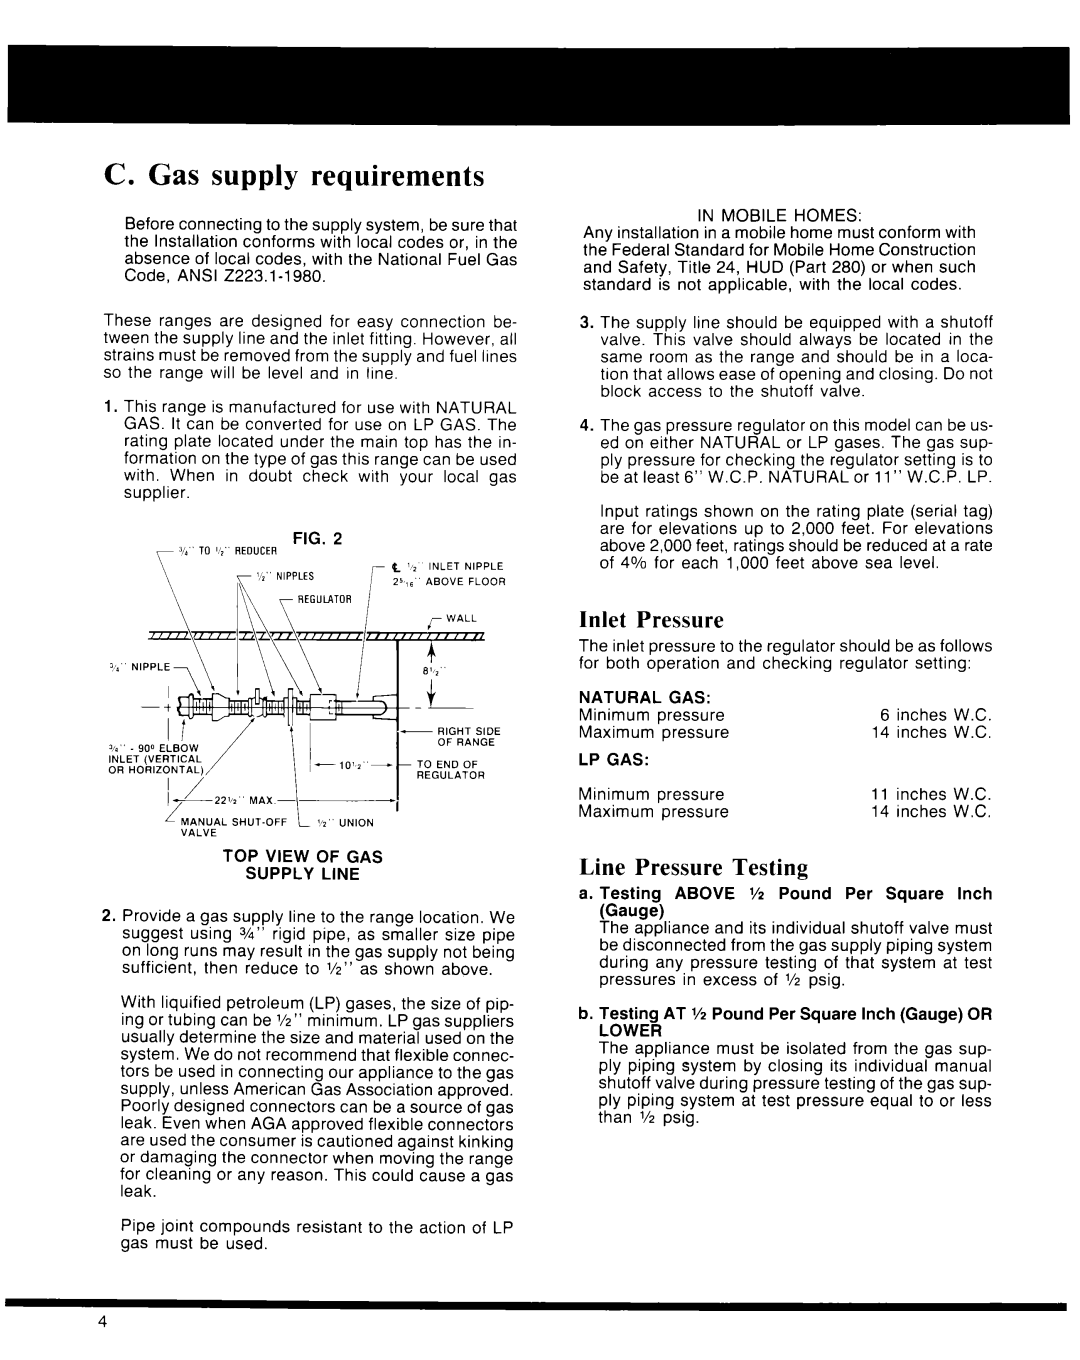 Whirlpool Microwave Oven manual C. Gas supply requirements, 81/Z”, Inlet Pressure, Line Pressure Testing 